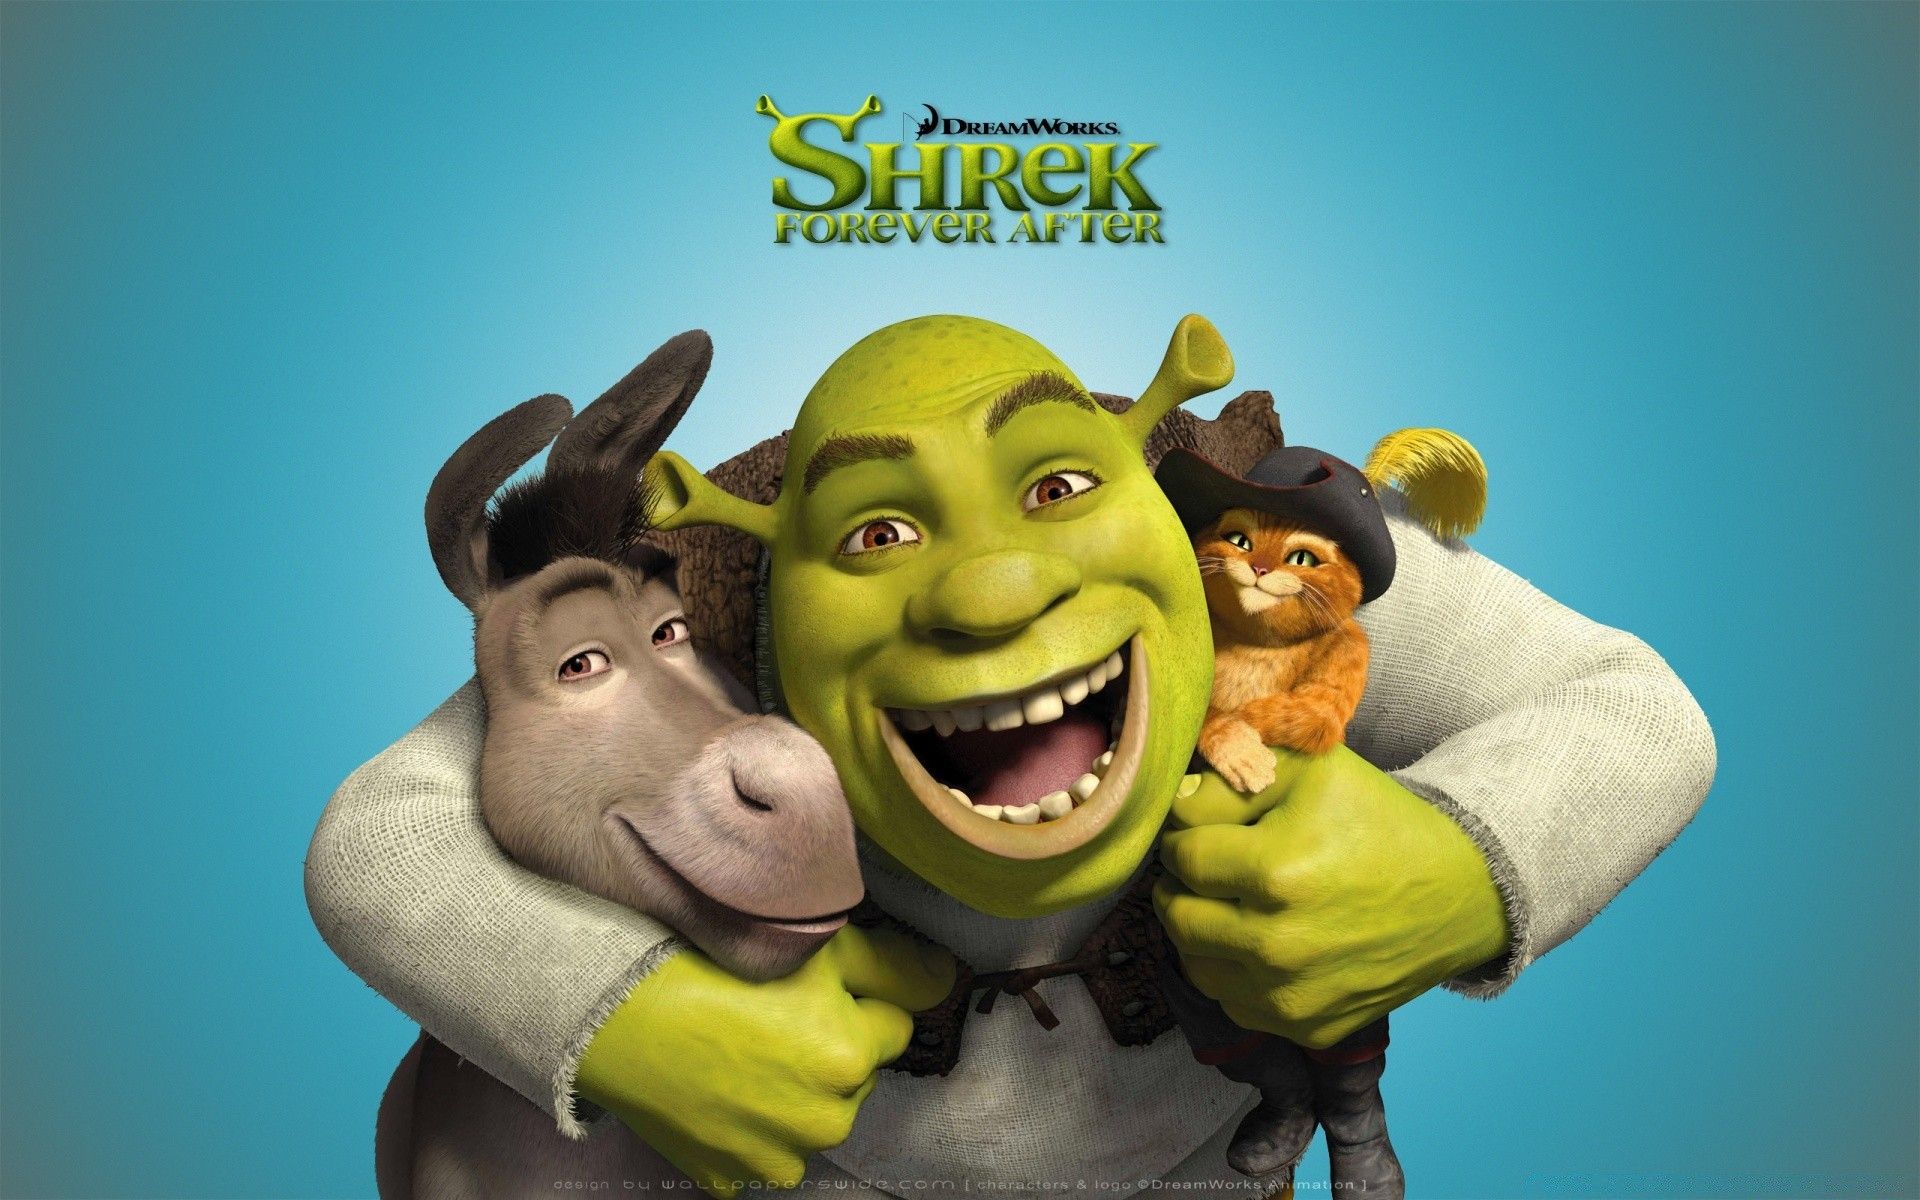 Shrek, Donkey and Puss in Boots, Shrek Forever After